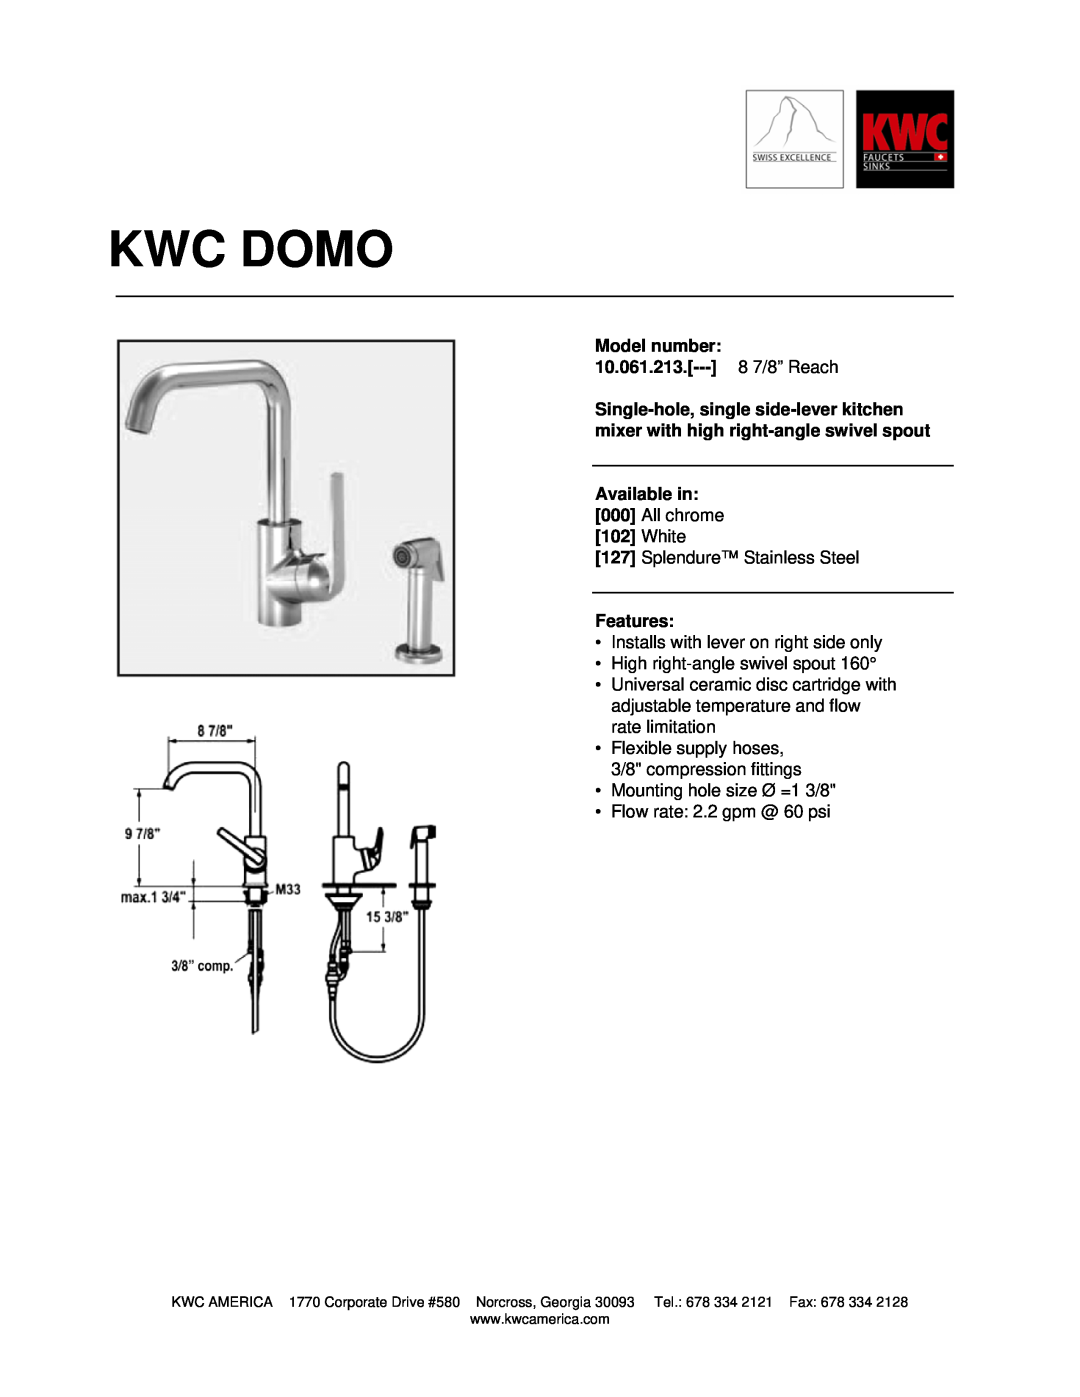 KWC manual Kwc Domo, Model number 10.061.213.--- 8 7/8” Reach, Available in, White, Features 